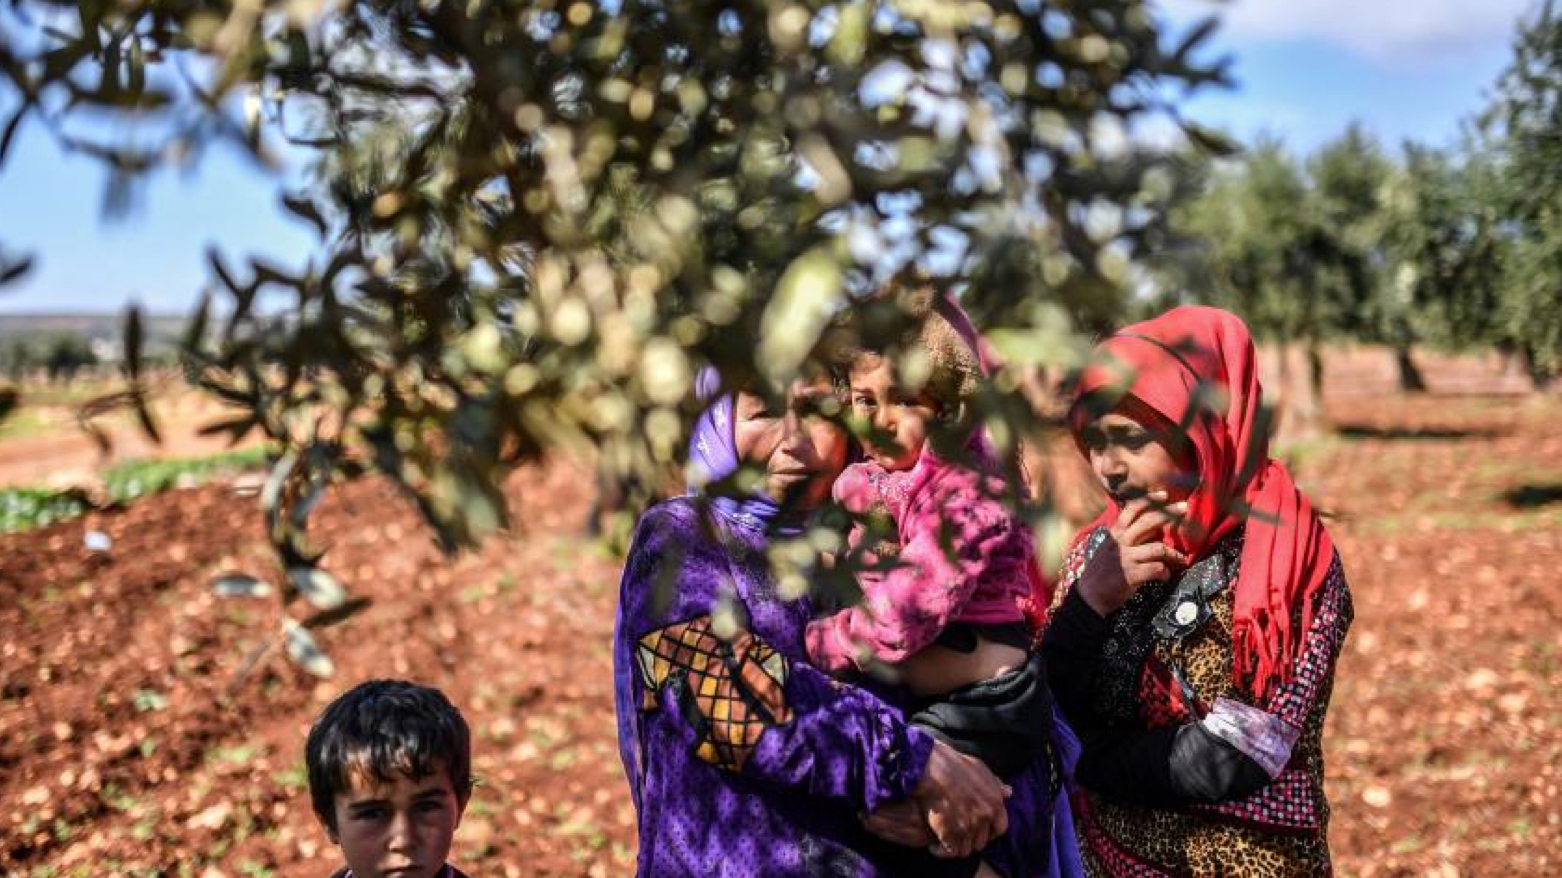 Syrians look on behind an olive tree branch as they arrive at a checkpoint in the village of Anab, March 17, 2018 (Photo: Bulent Kilic/AFP)